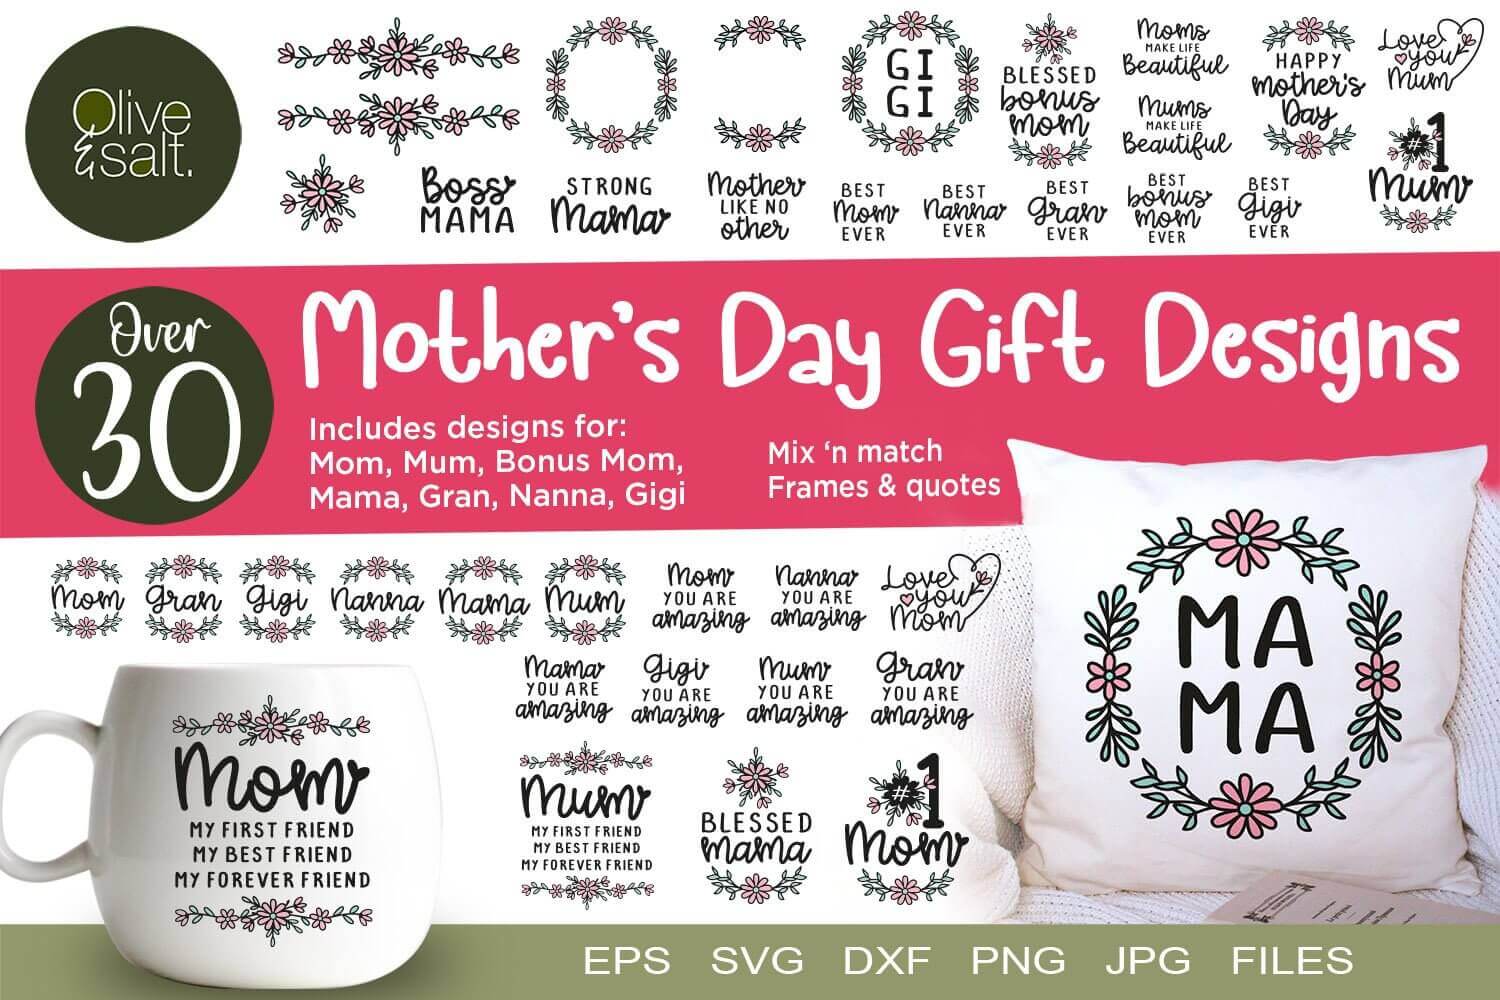 Mother's Day Gift Designs by Olive and Salt.